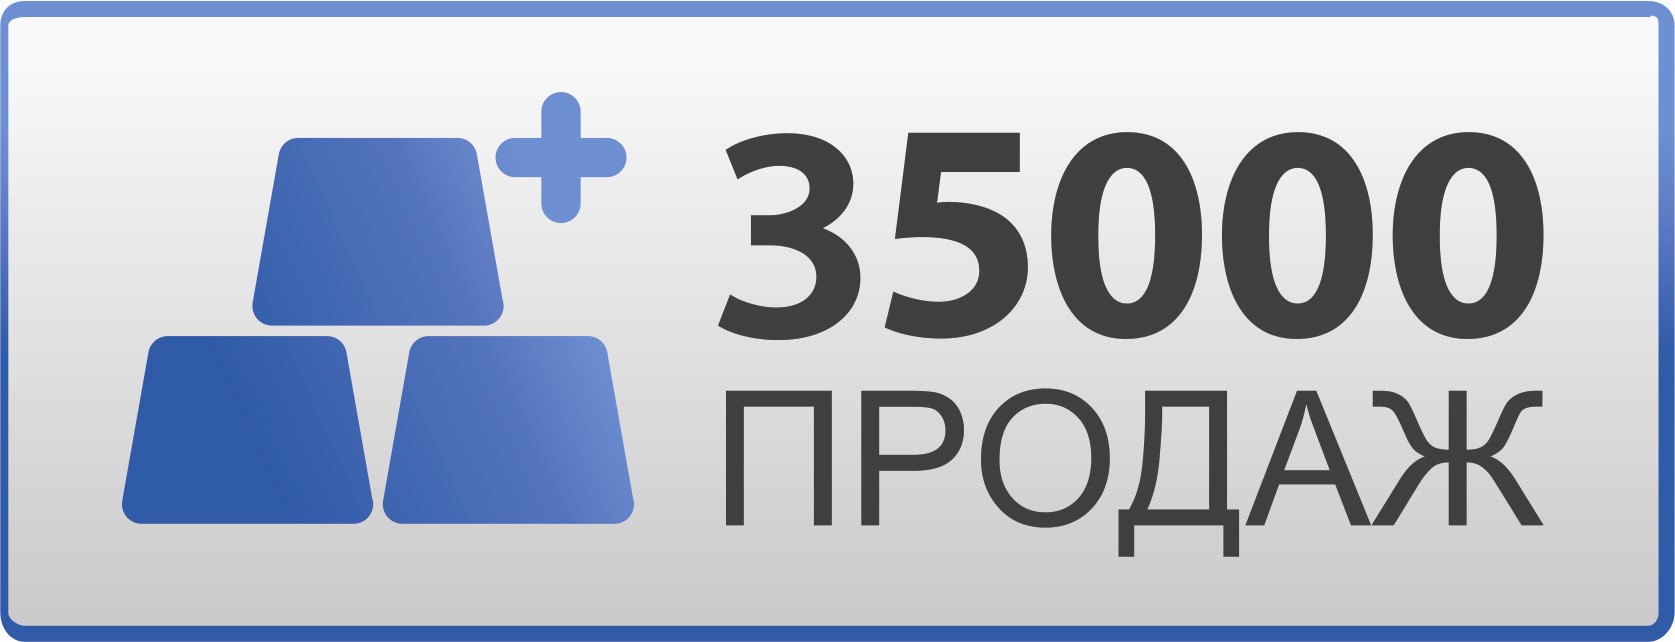 iTunes Gift Card (Russia) 300 rubles💳